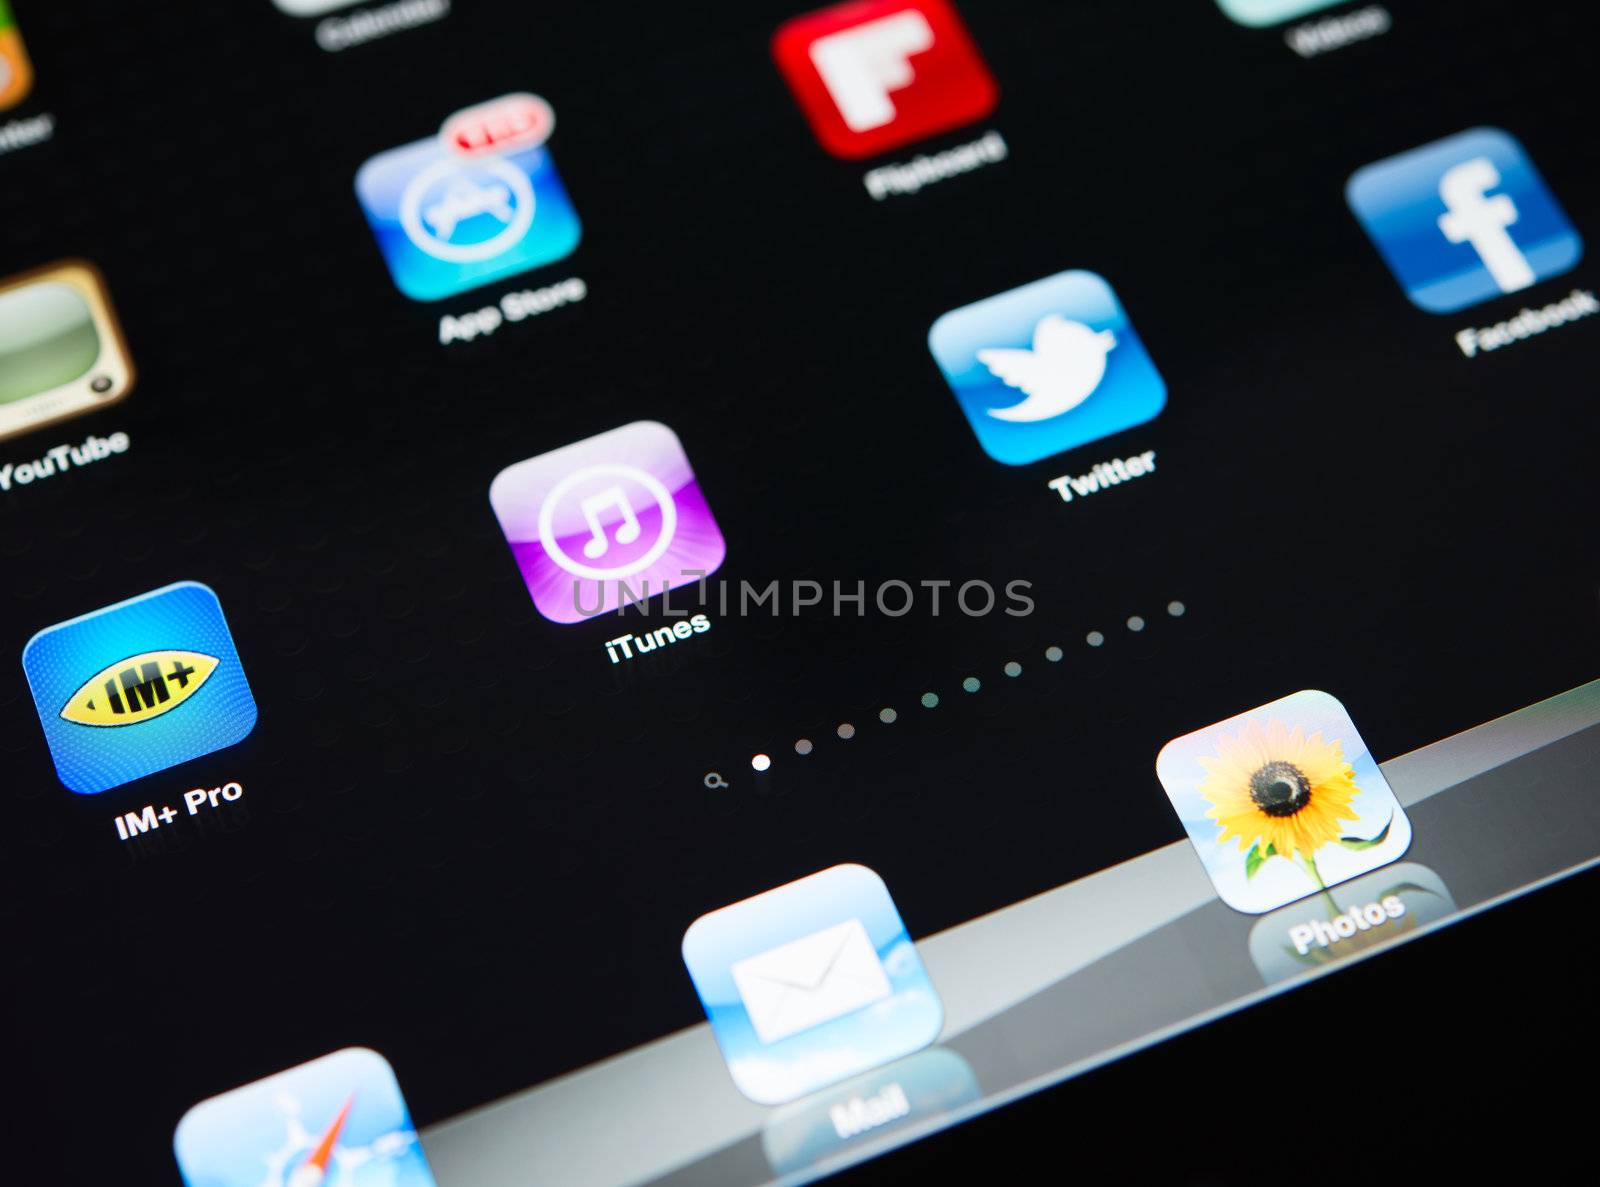 Crimea, Ukraine - October 3, 2012: A close up of an illuminated Apple iPad New screen showing the App Store and various apps